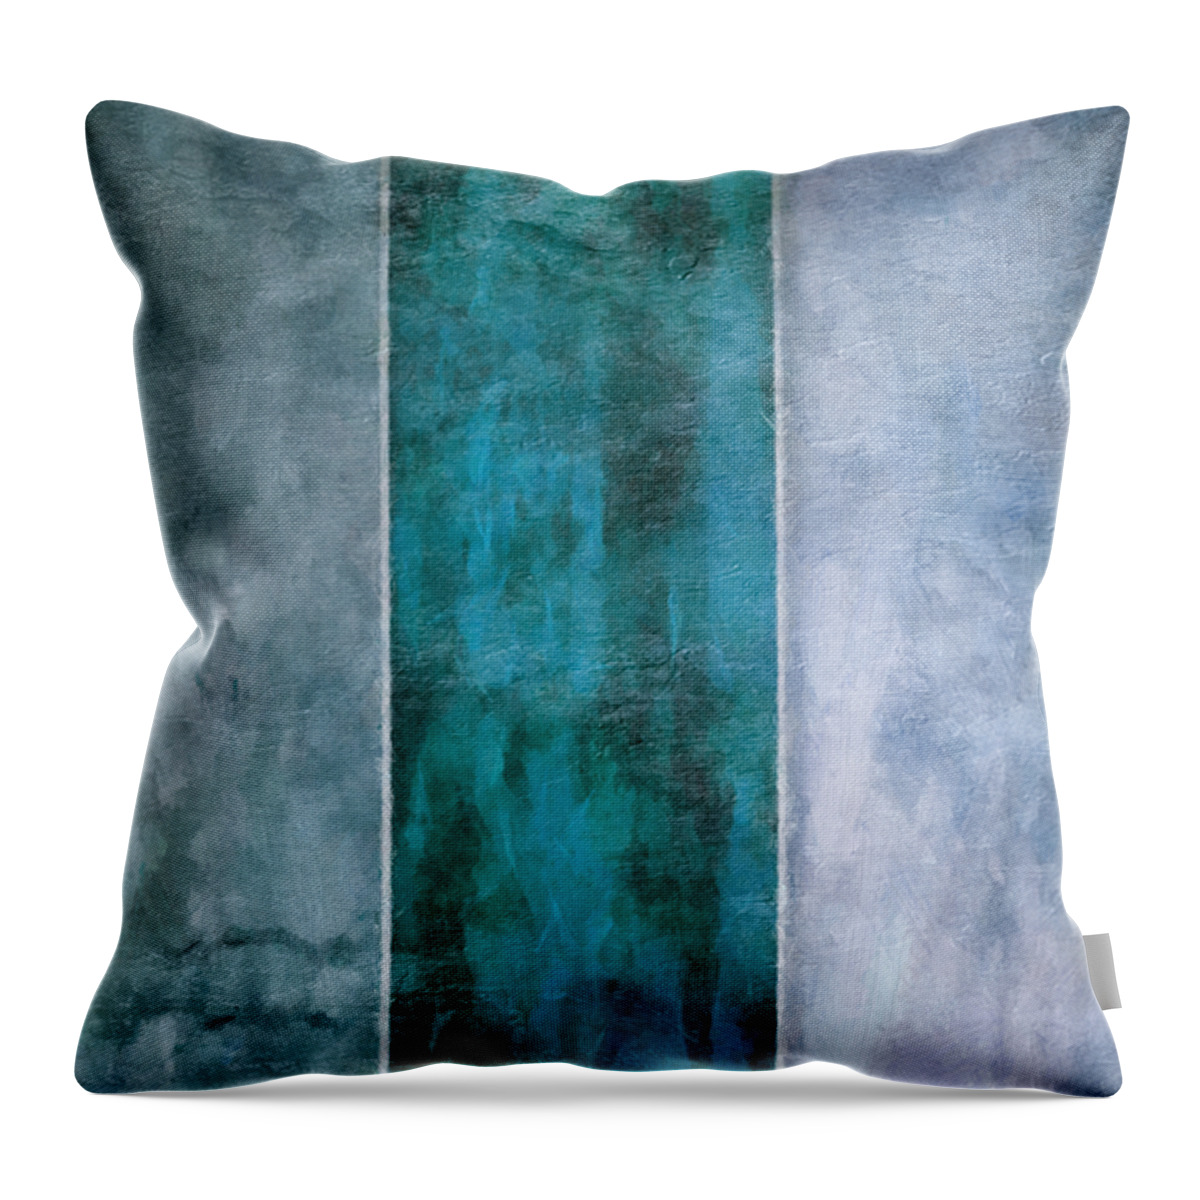 Abstract Throw Pillow featuring the mixed media 5 Water by Angelina Tamez